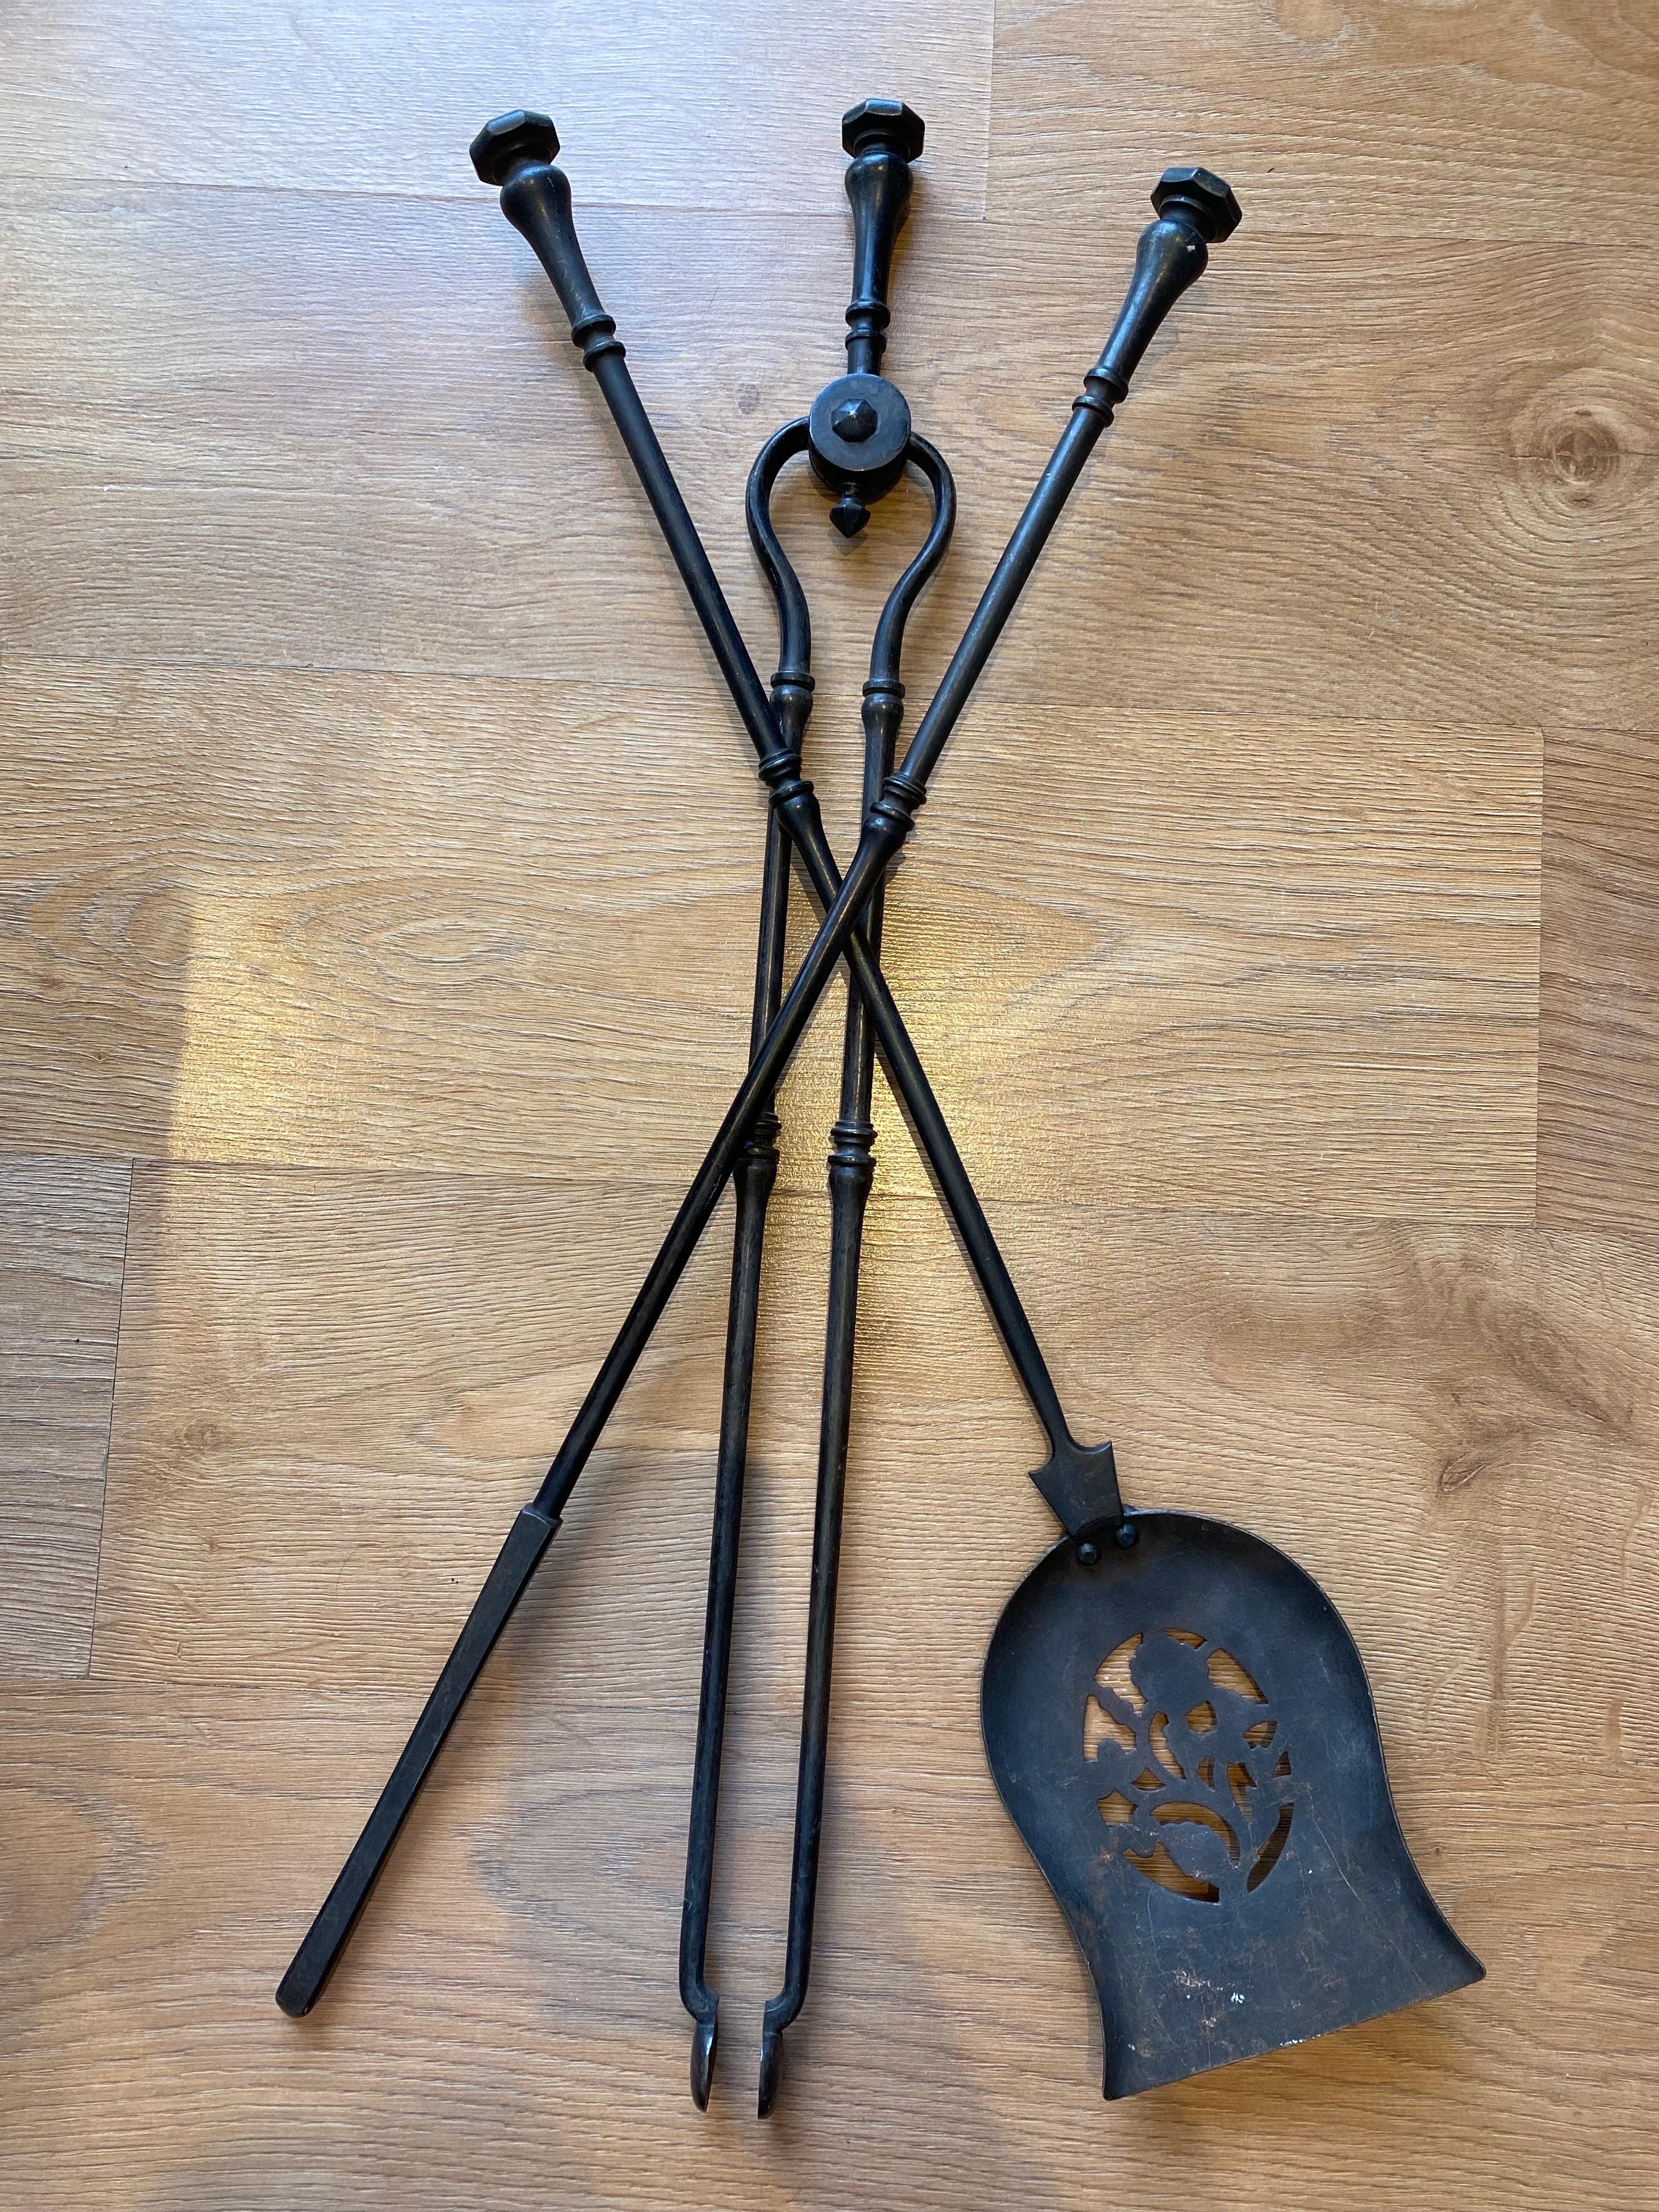 A stunning antique Victorian Iron fire companion set. The superb set is solid brass, with beautiful ball motif. with matching the elegant yet powerful impression the set provides. This is truly a remarkable set, with fantastic craftsmanship. A